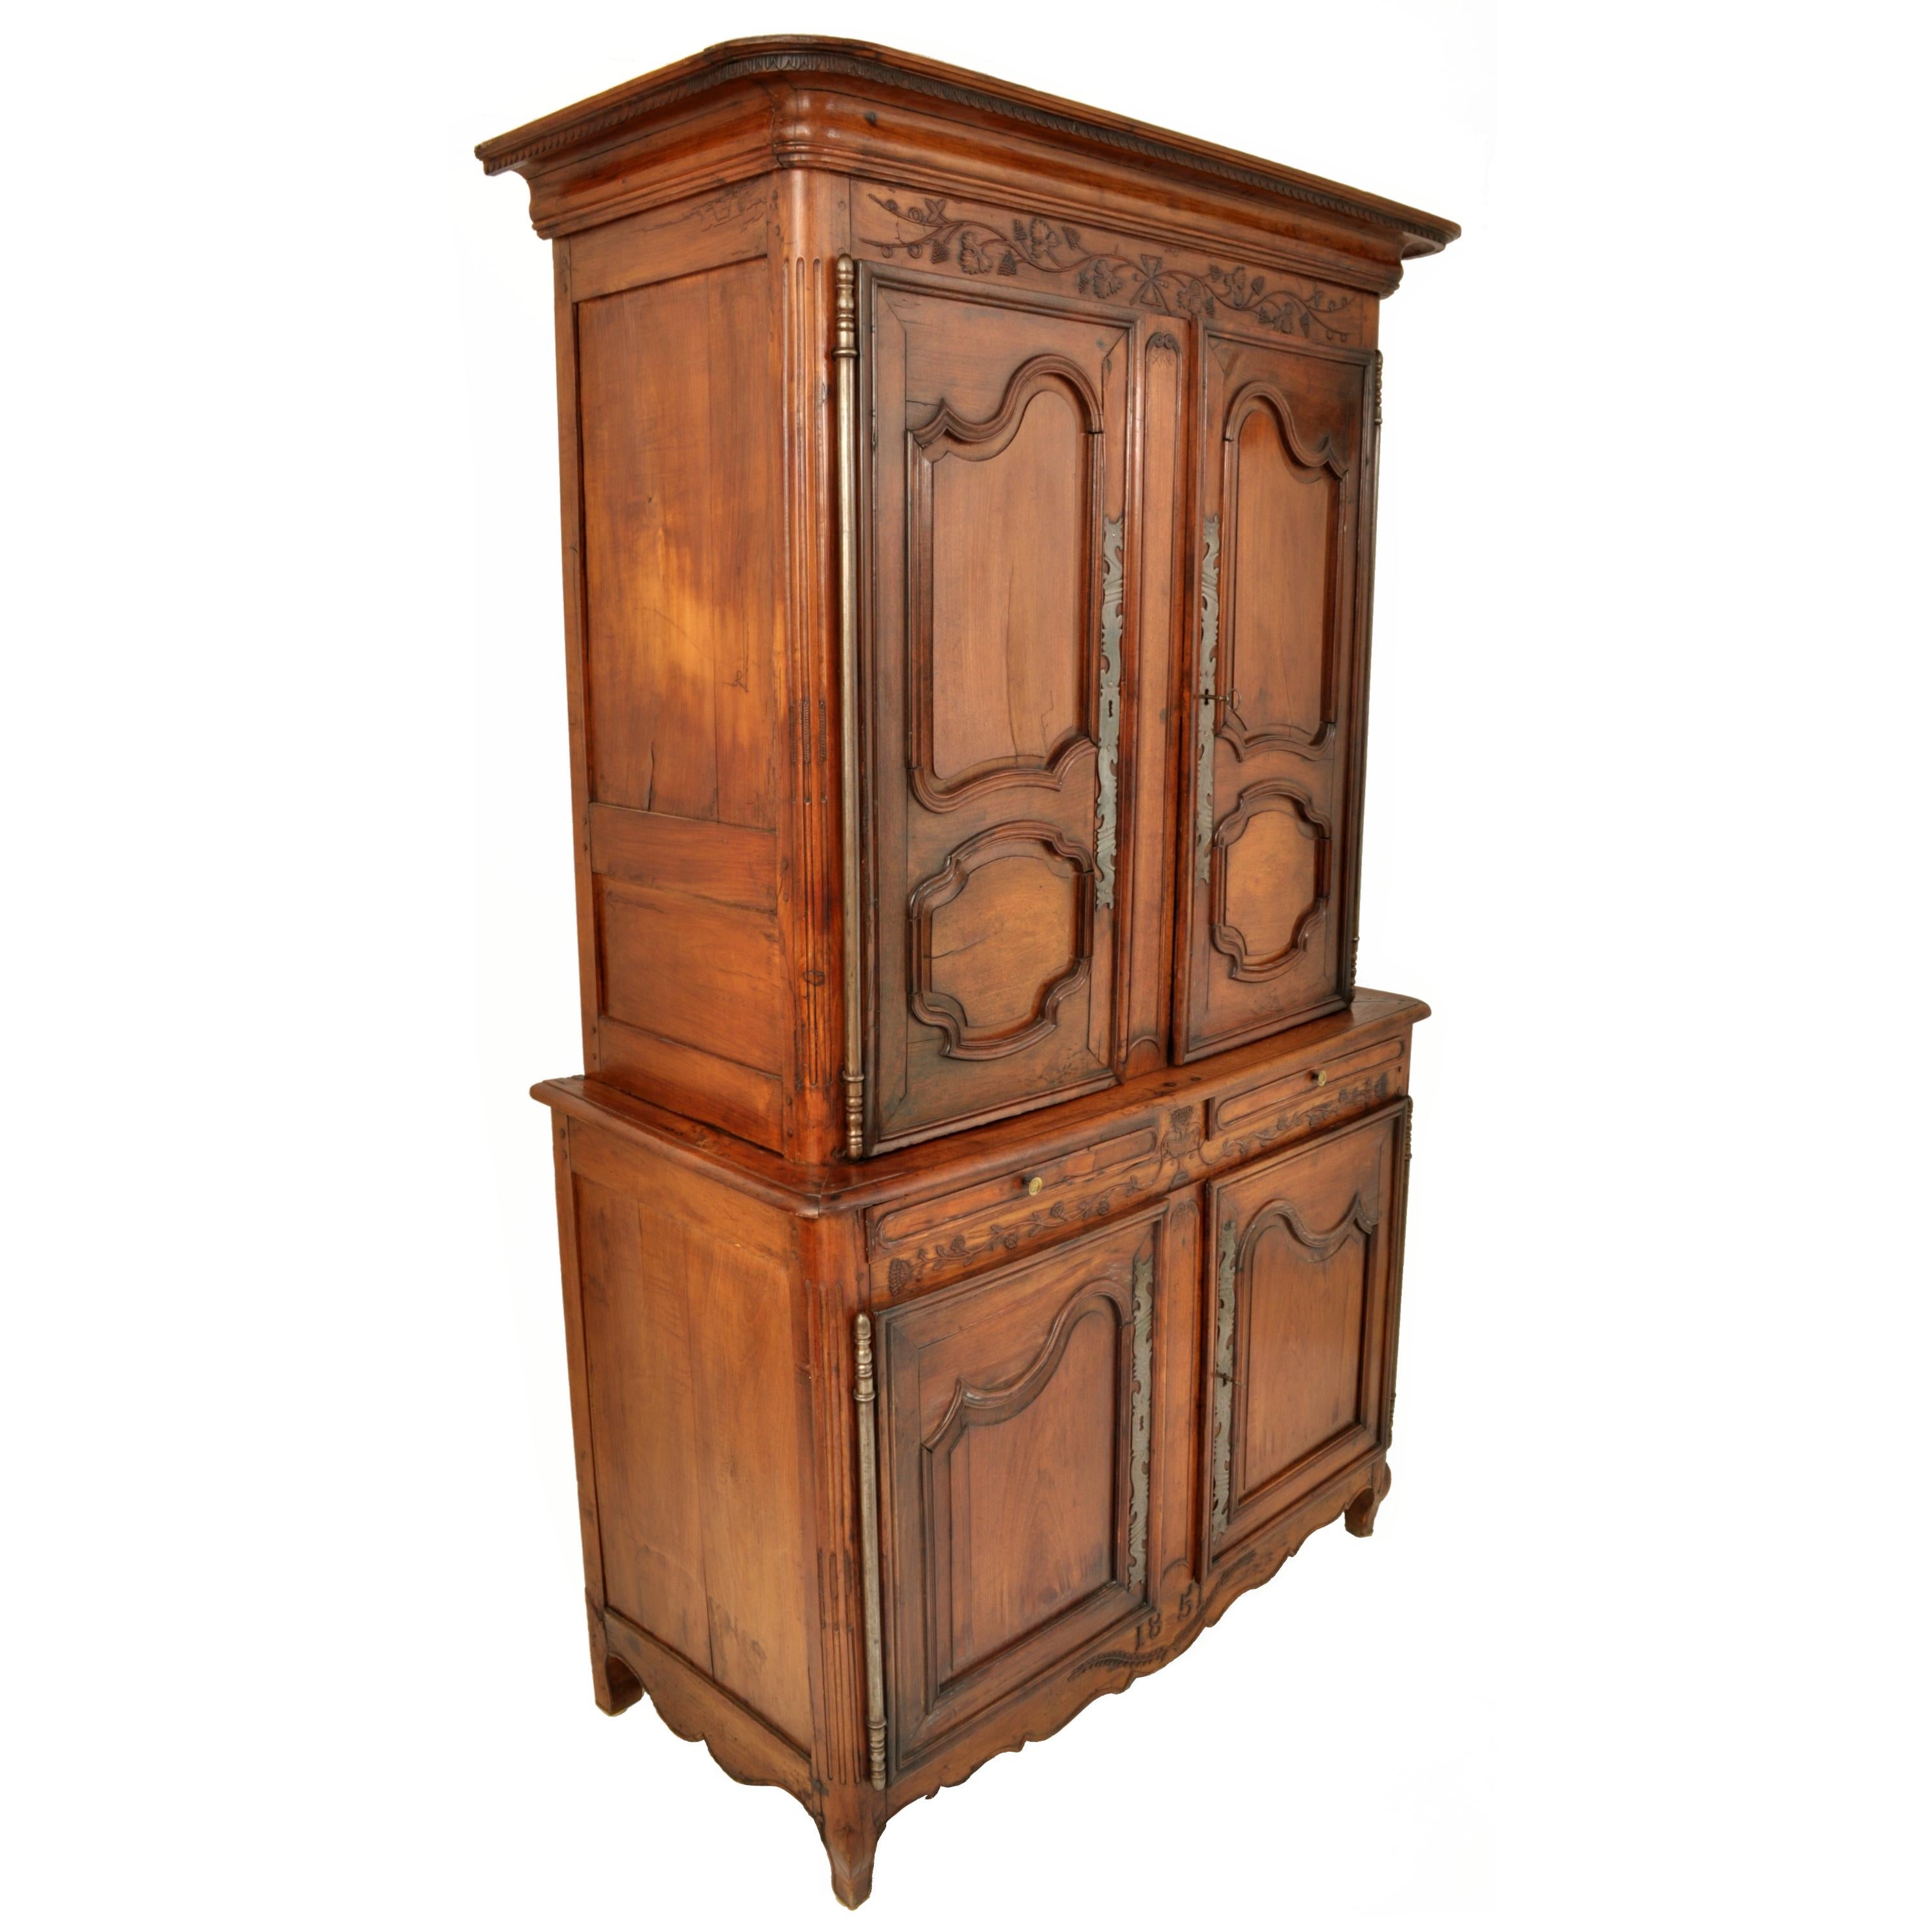 Fine antique 19th century French Provincial fruitwood buffet a' deux corps, dated 1851.
This fine antique buffet was last purchased in 2005 for $20,000, please see the last image for a copy of the sales invoice.
The buffet having a carved stepped